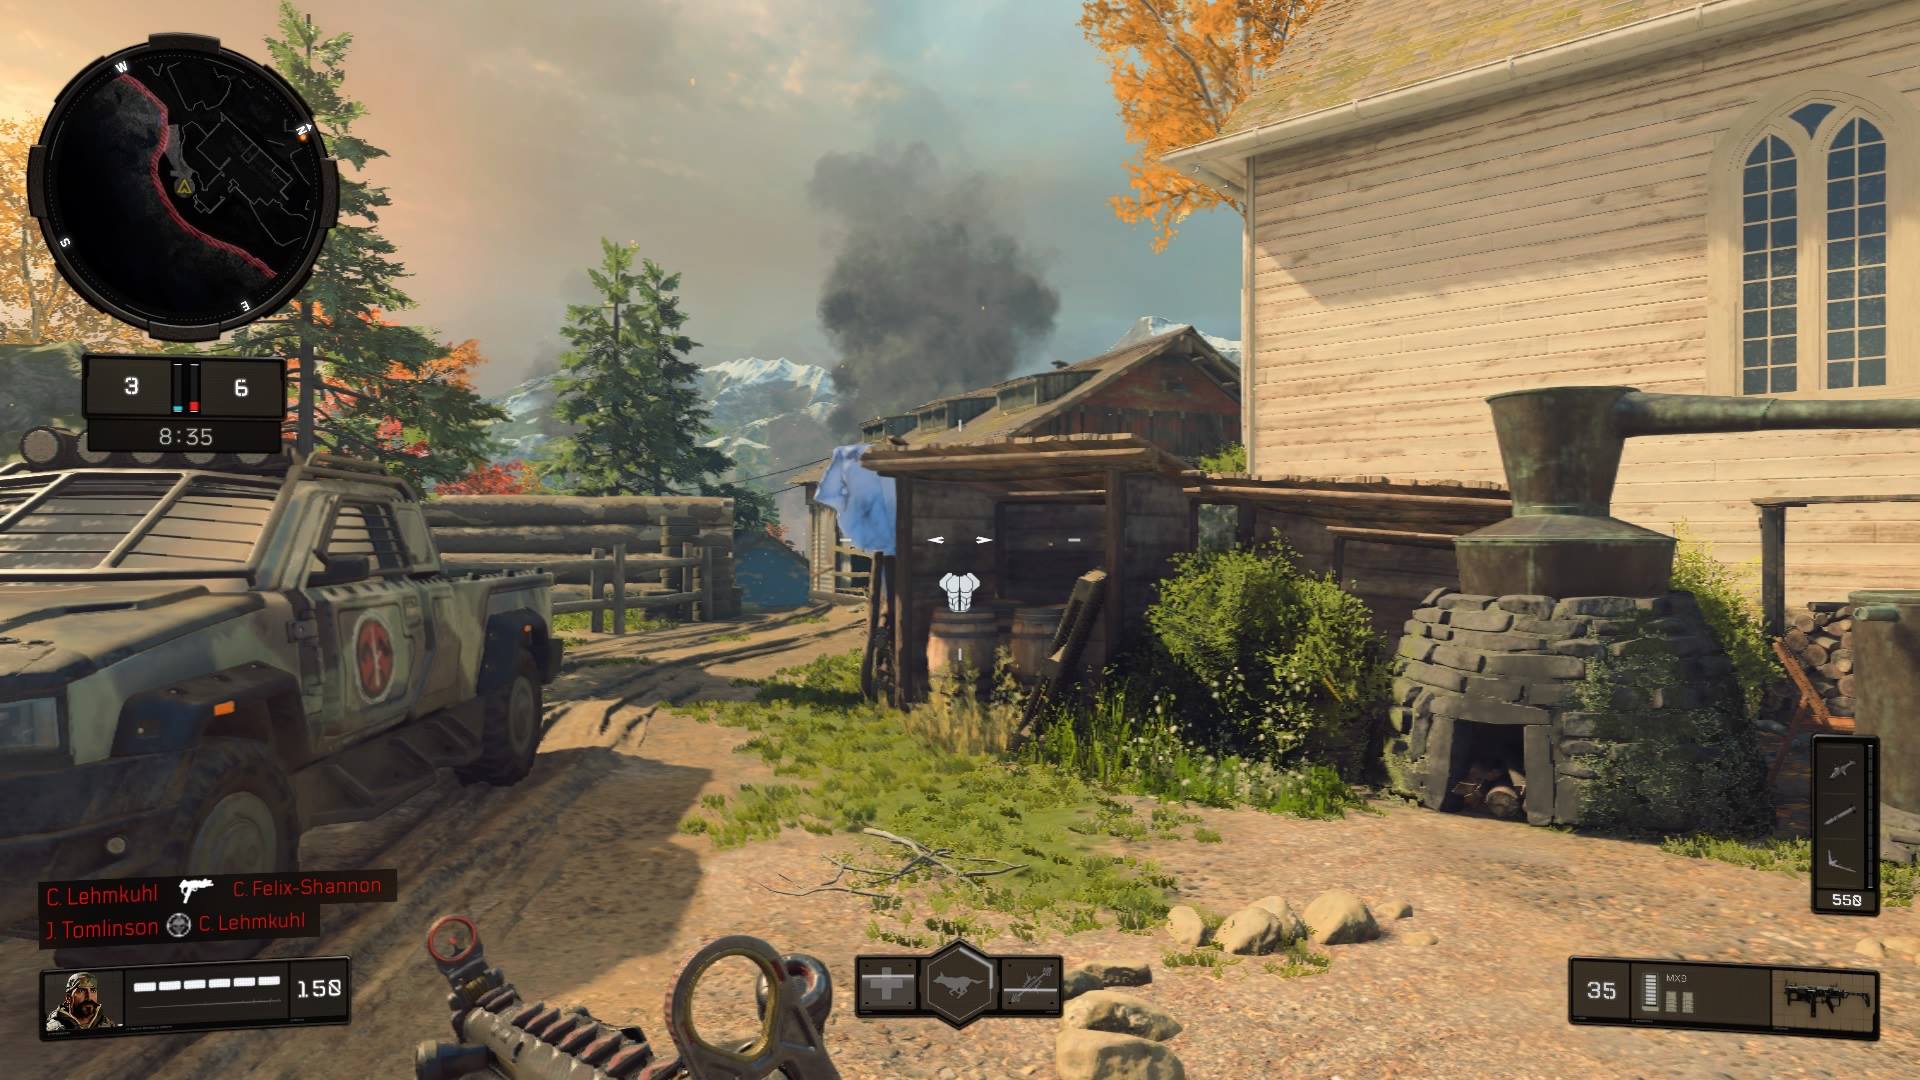 Call of Duty: Black Ops 4 map "Militia" takes players deep in the woods.